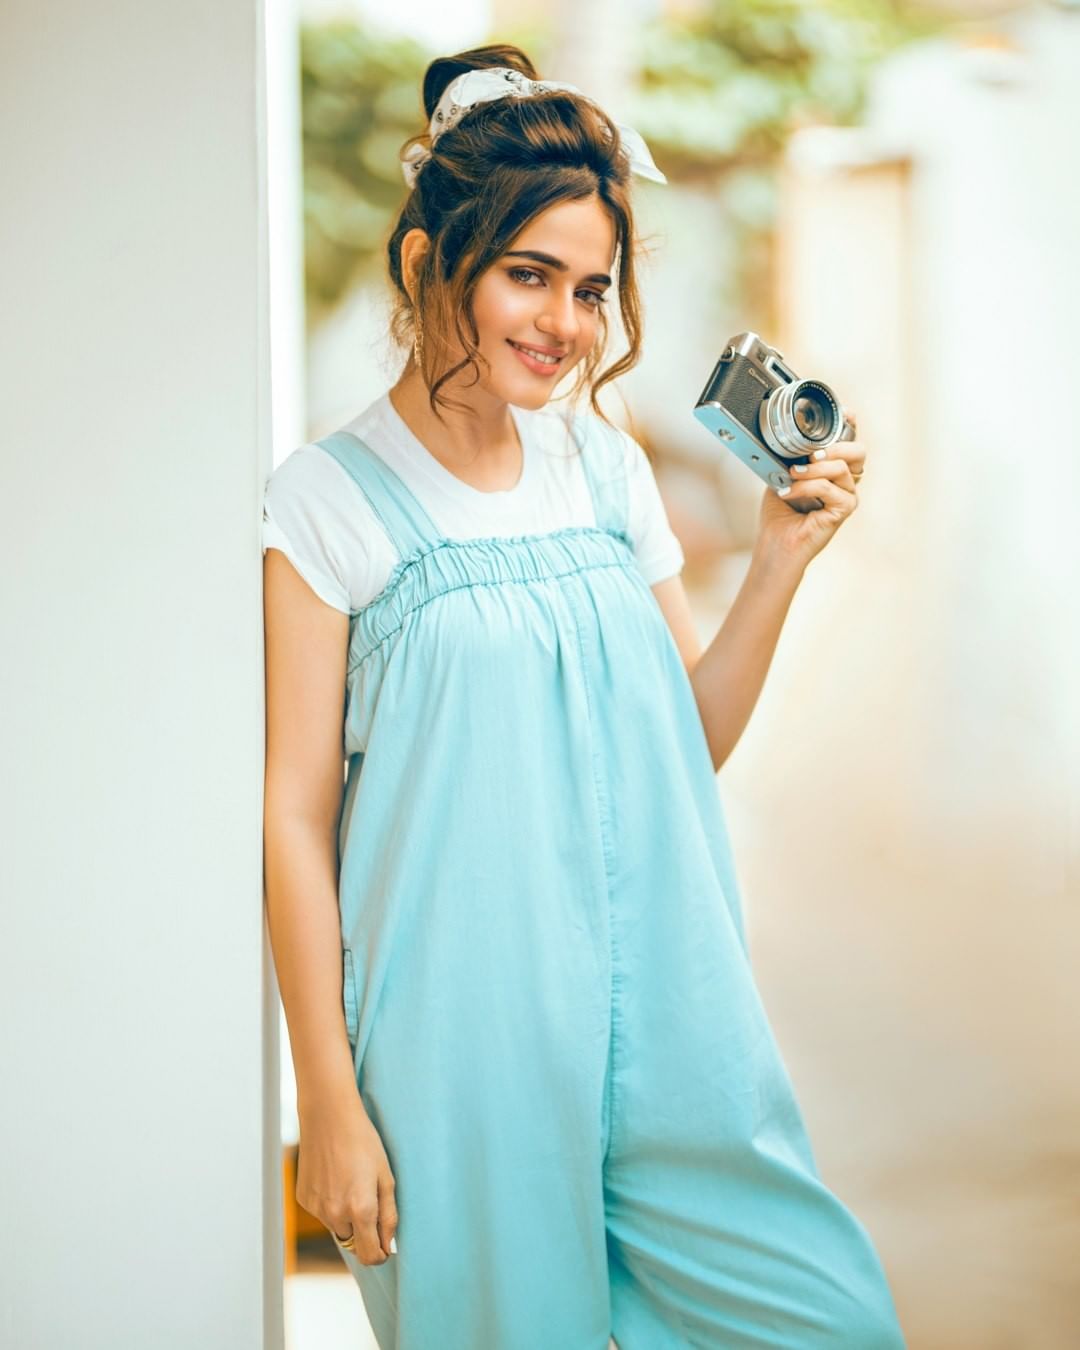 Sumbul Iqbal is Looking Gorgeous in her trendy look for Latest Photo shoot